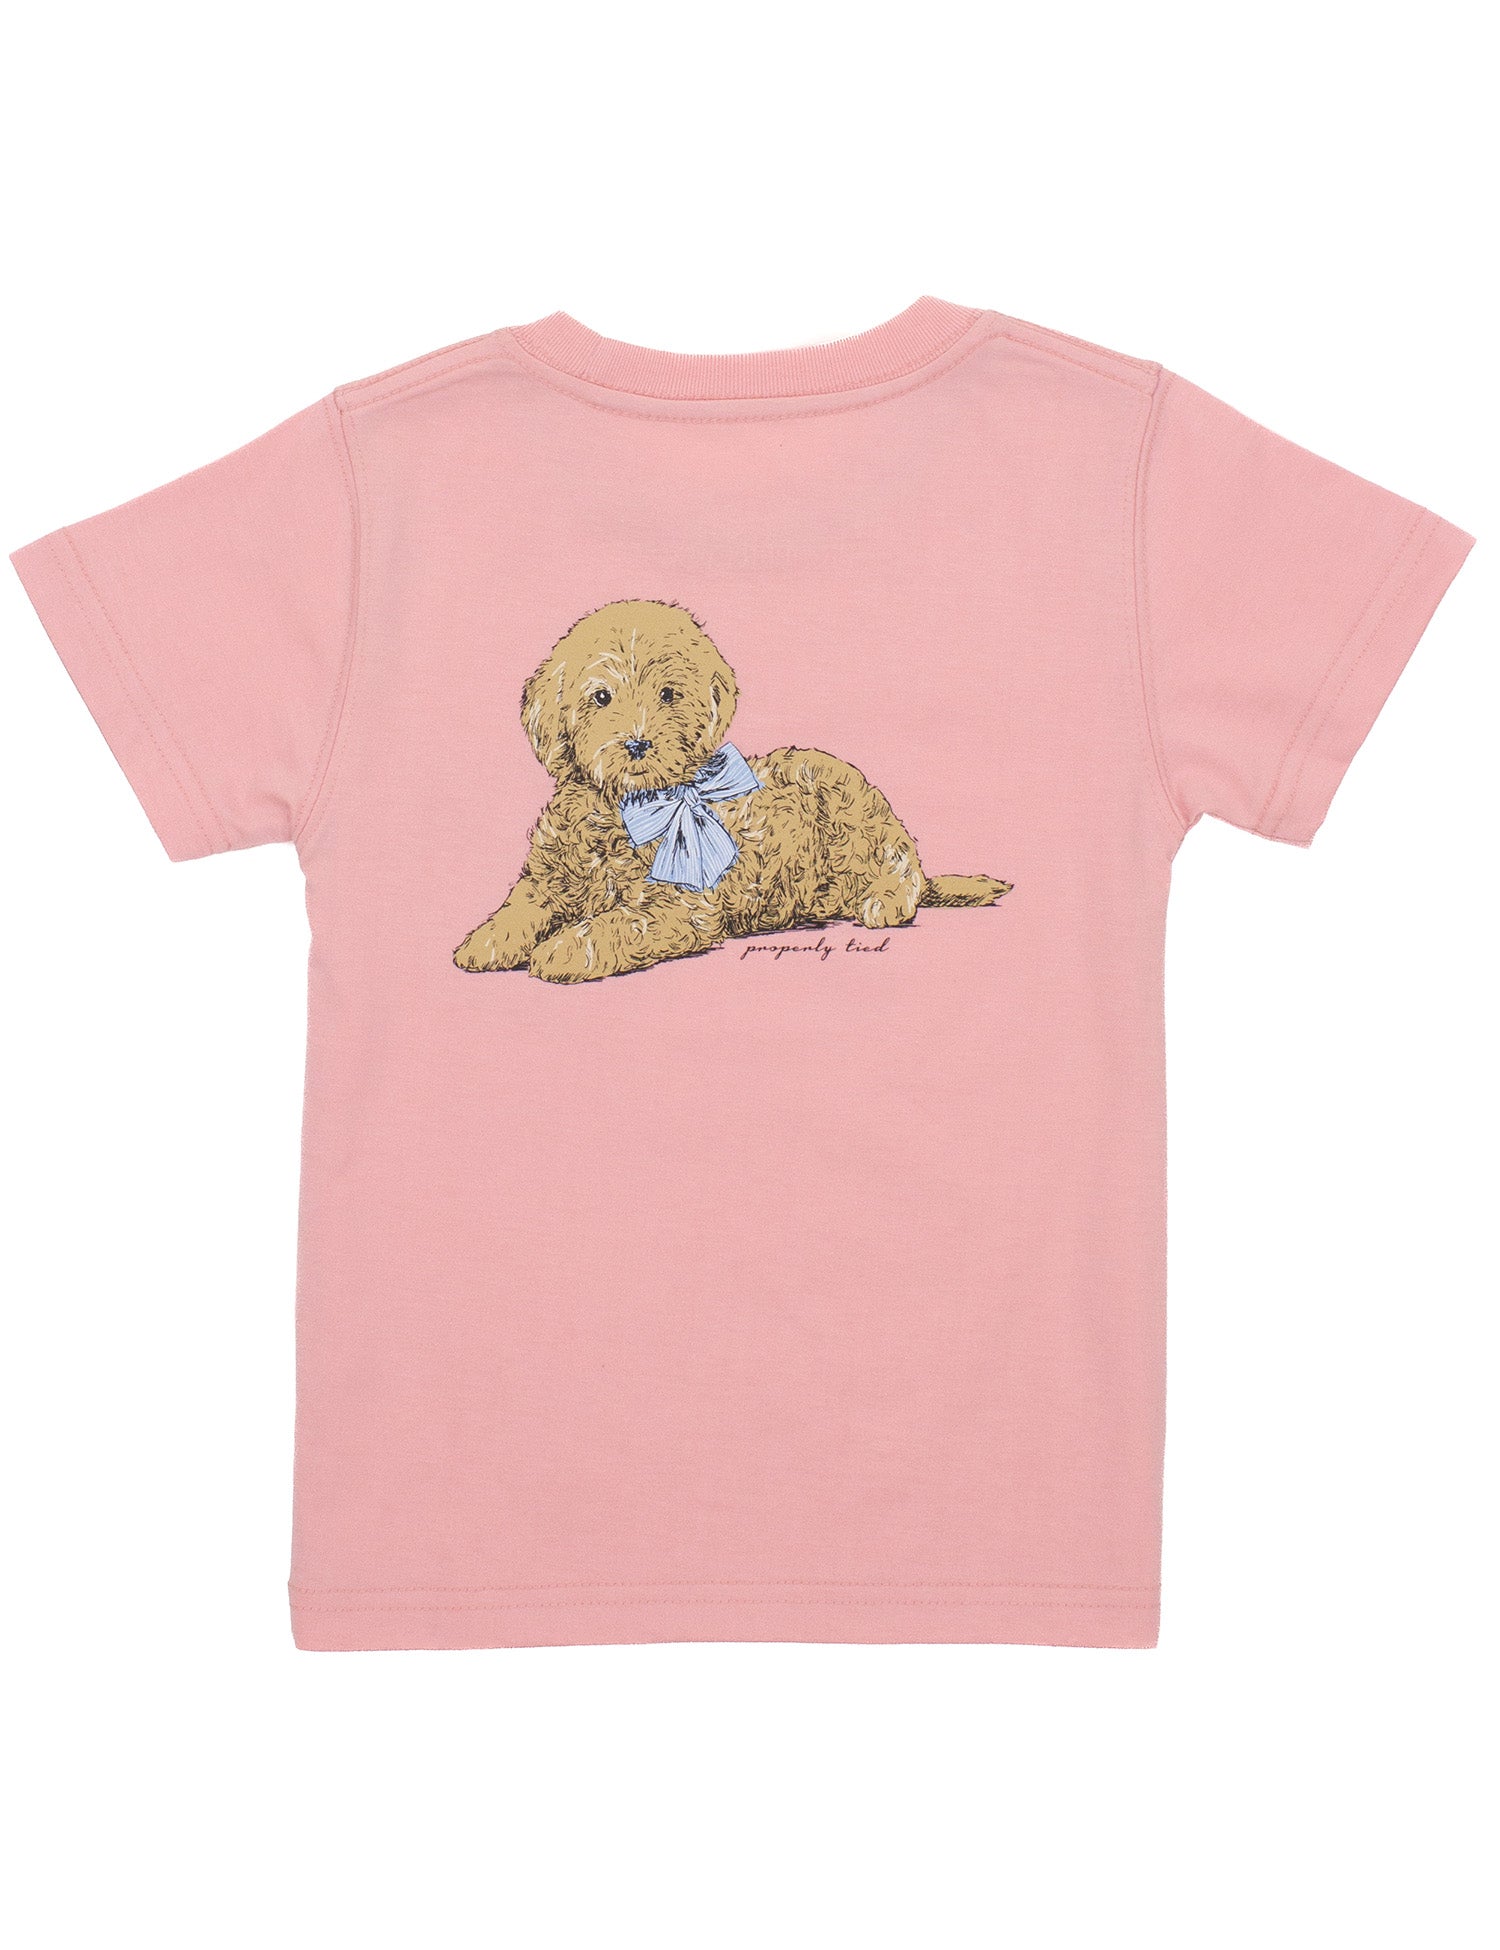 Properly Tied - Girls Doodle Tee (Blush)